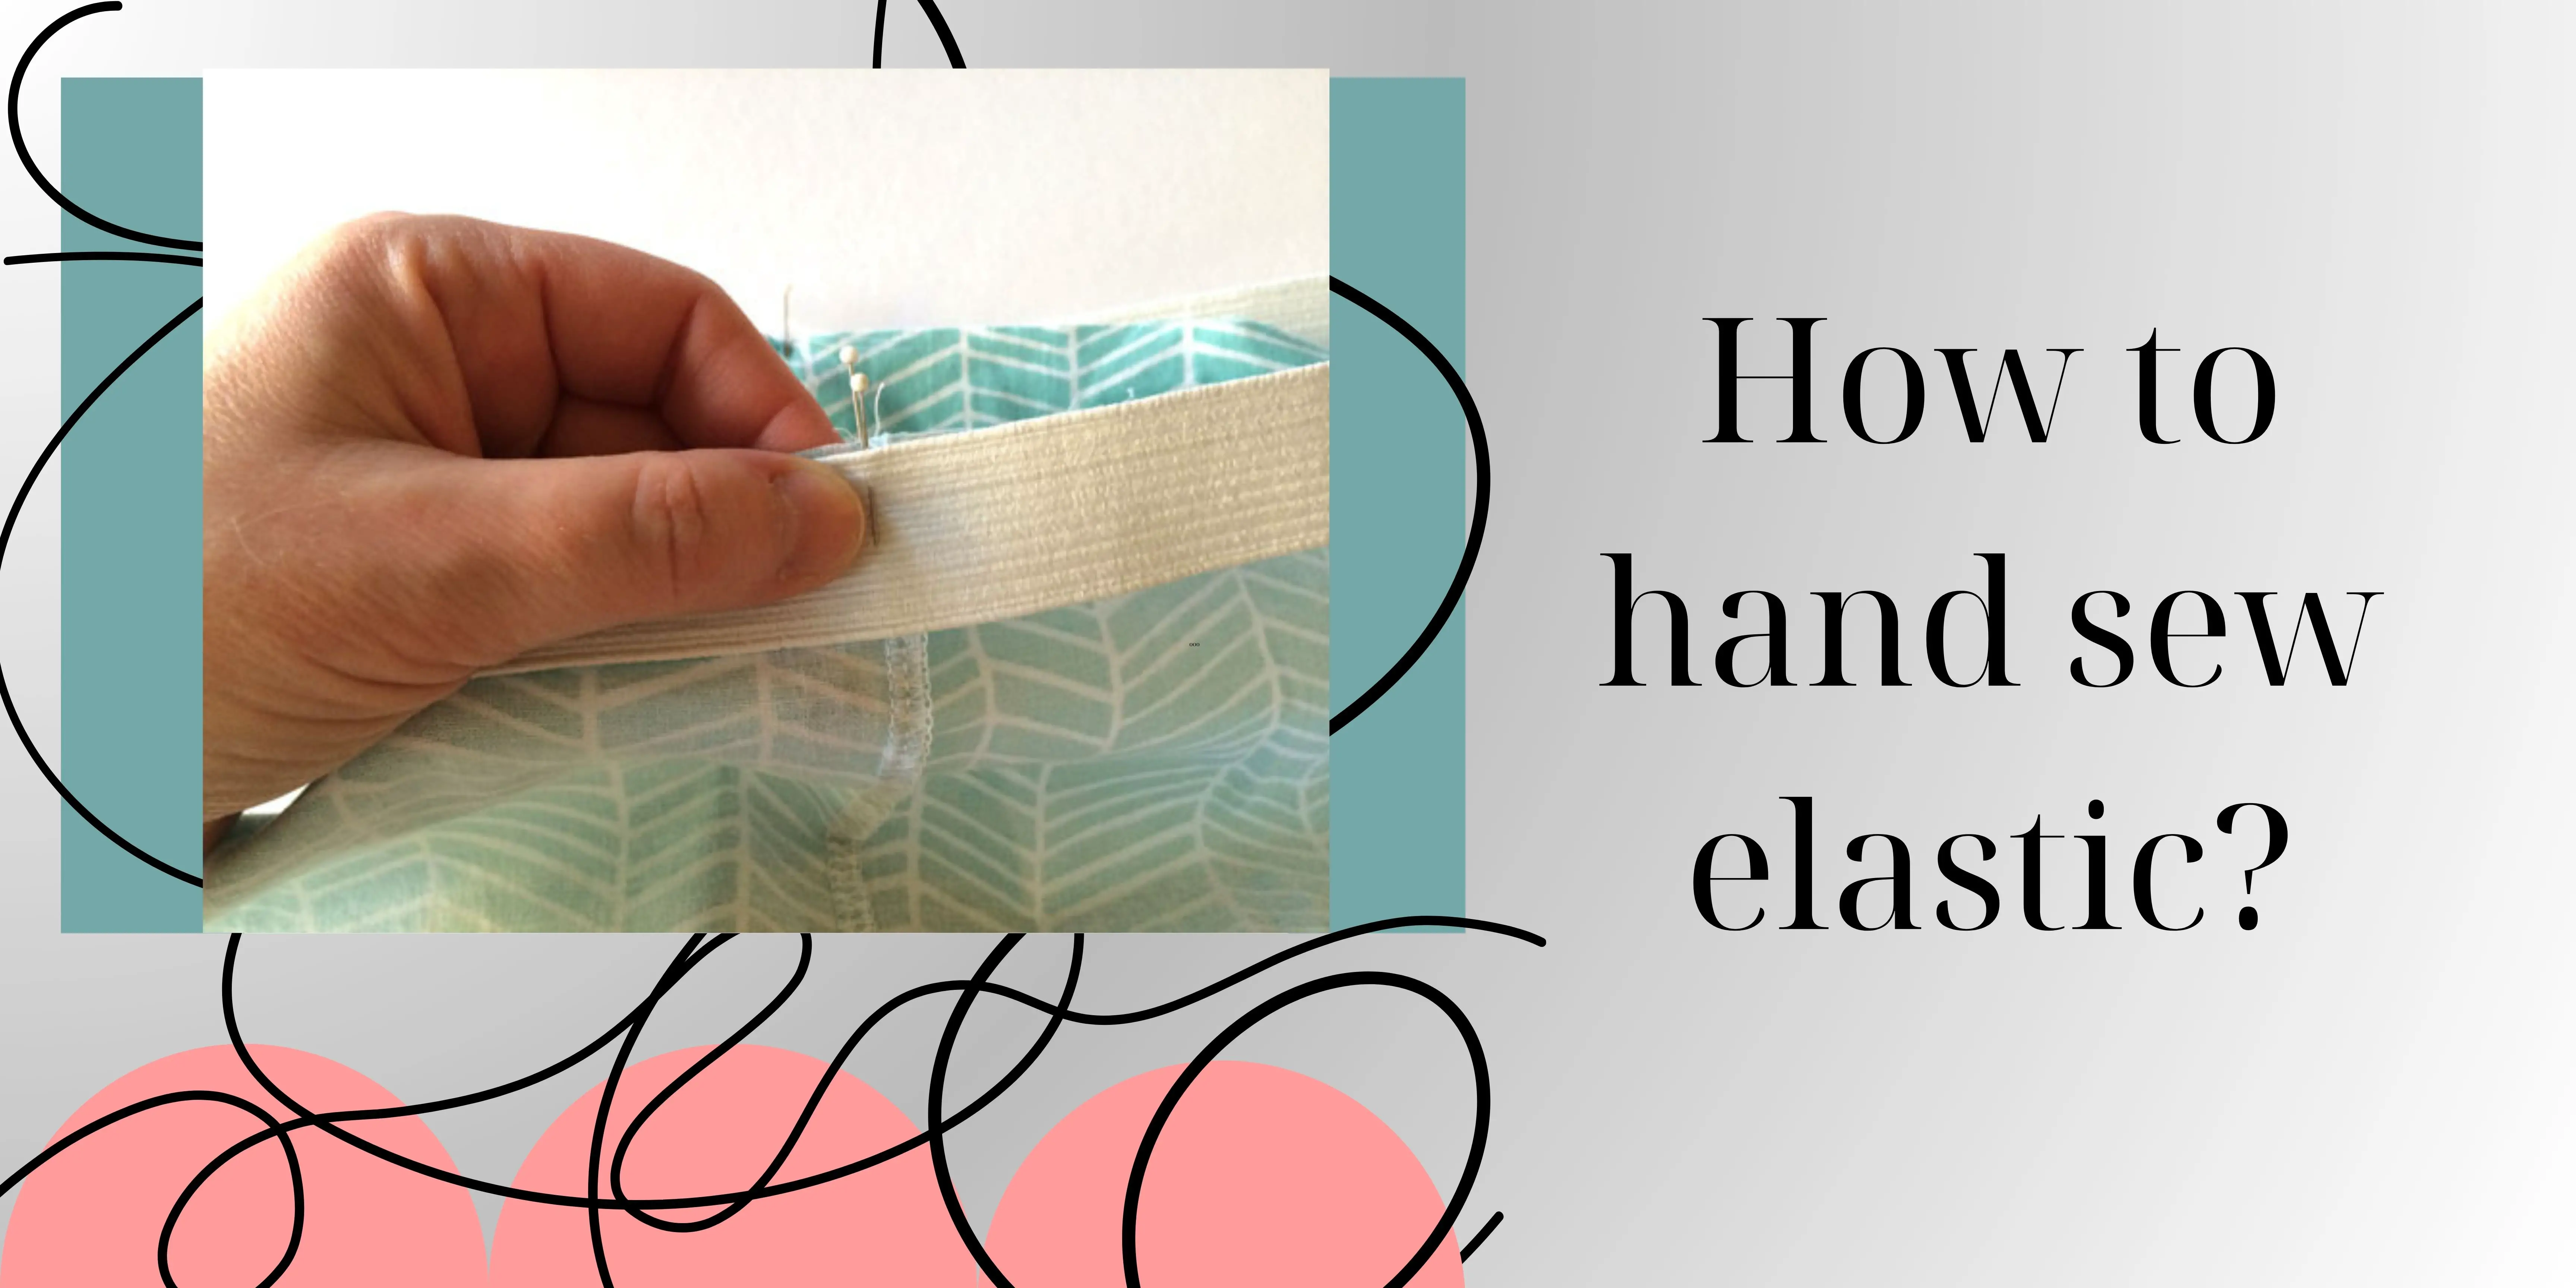 How To Hand Sew Elastic?